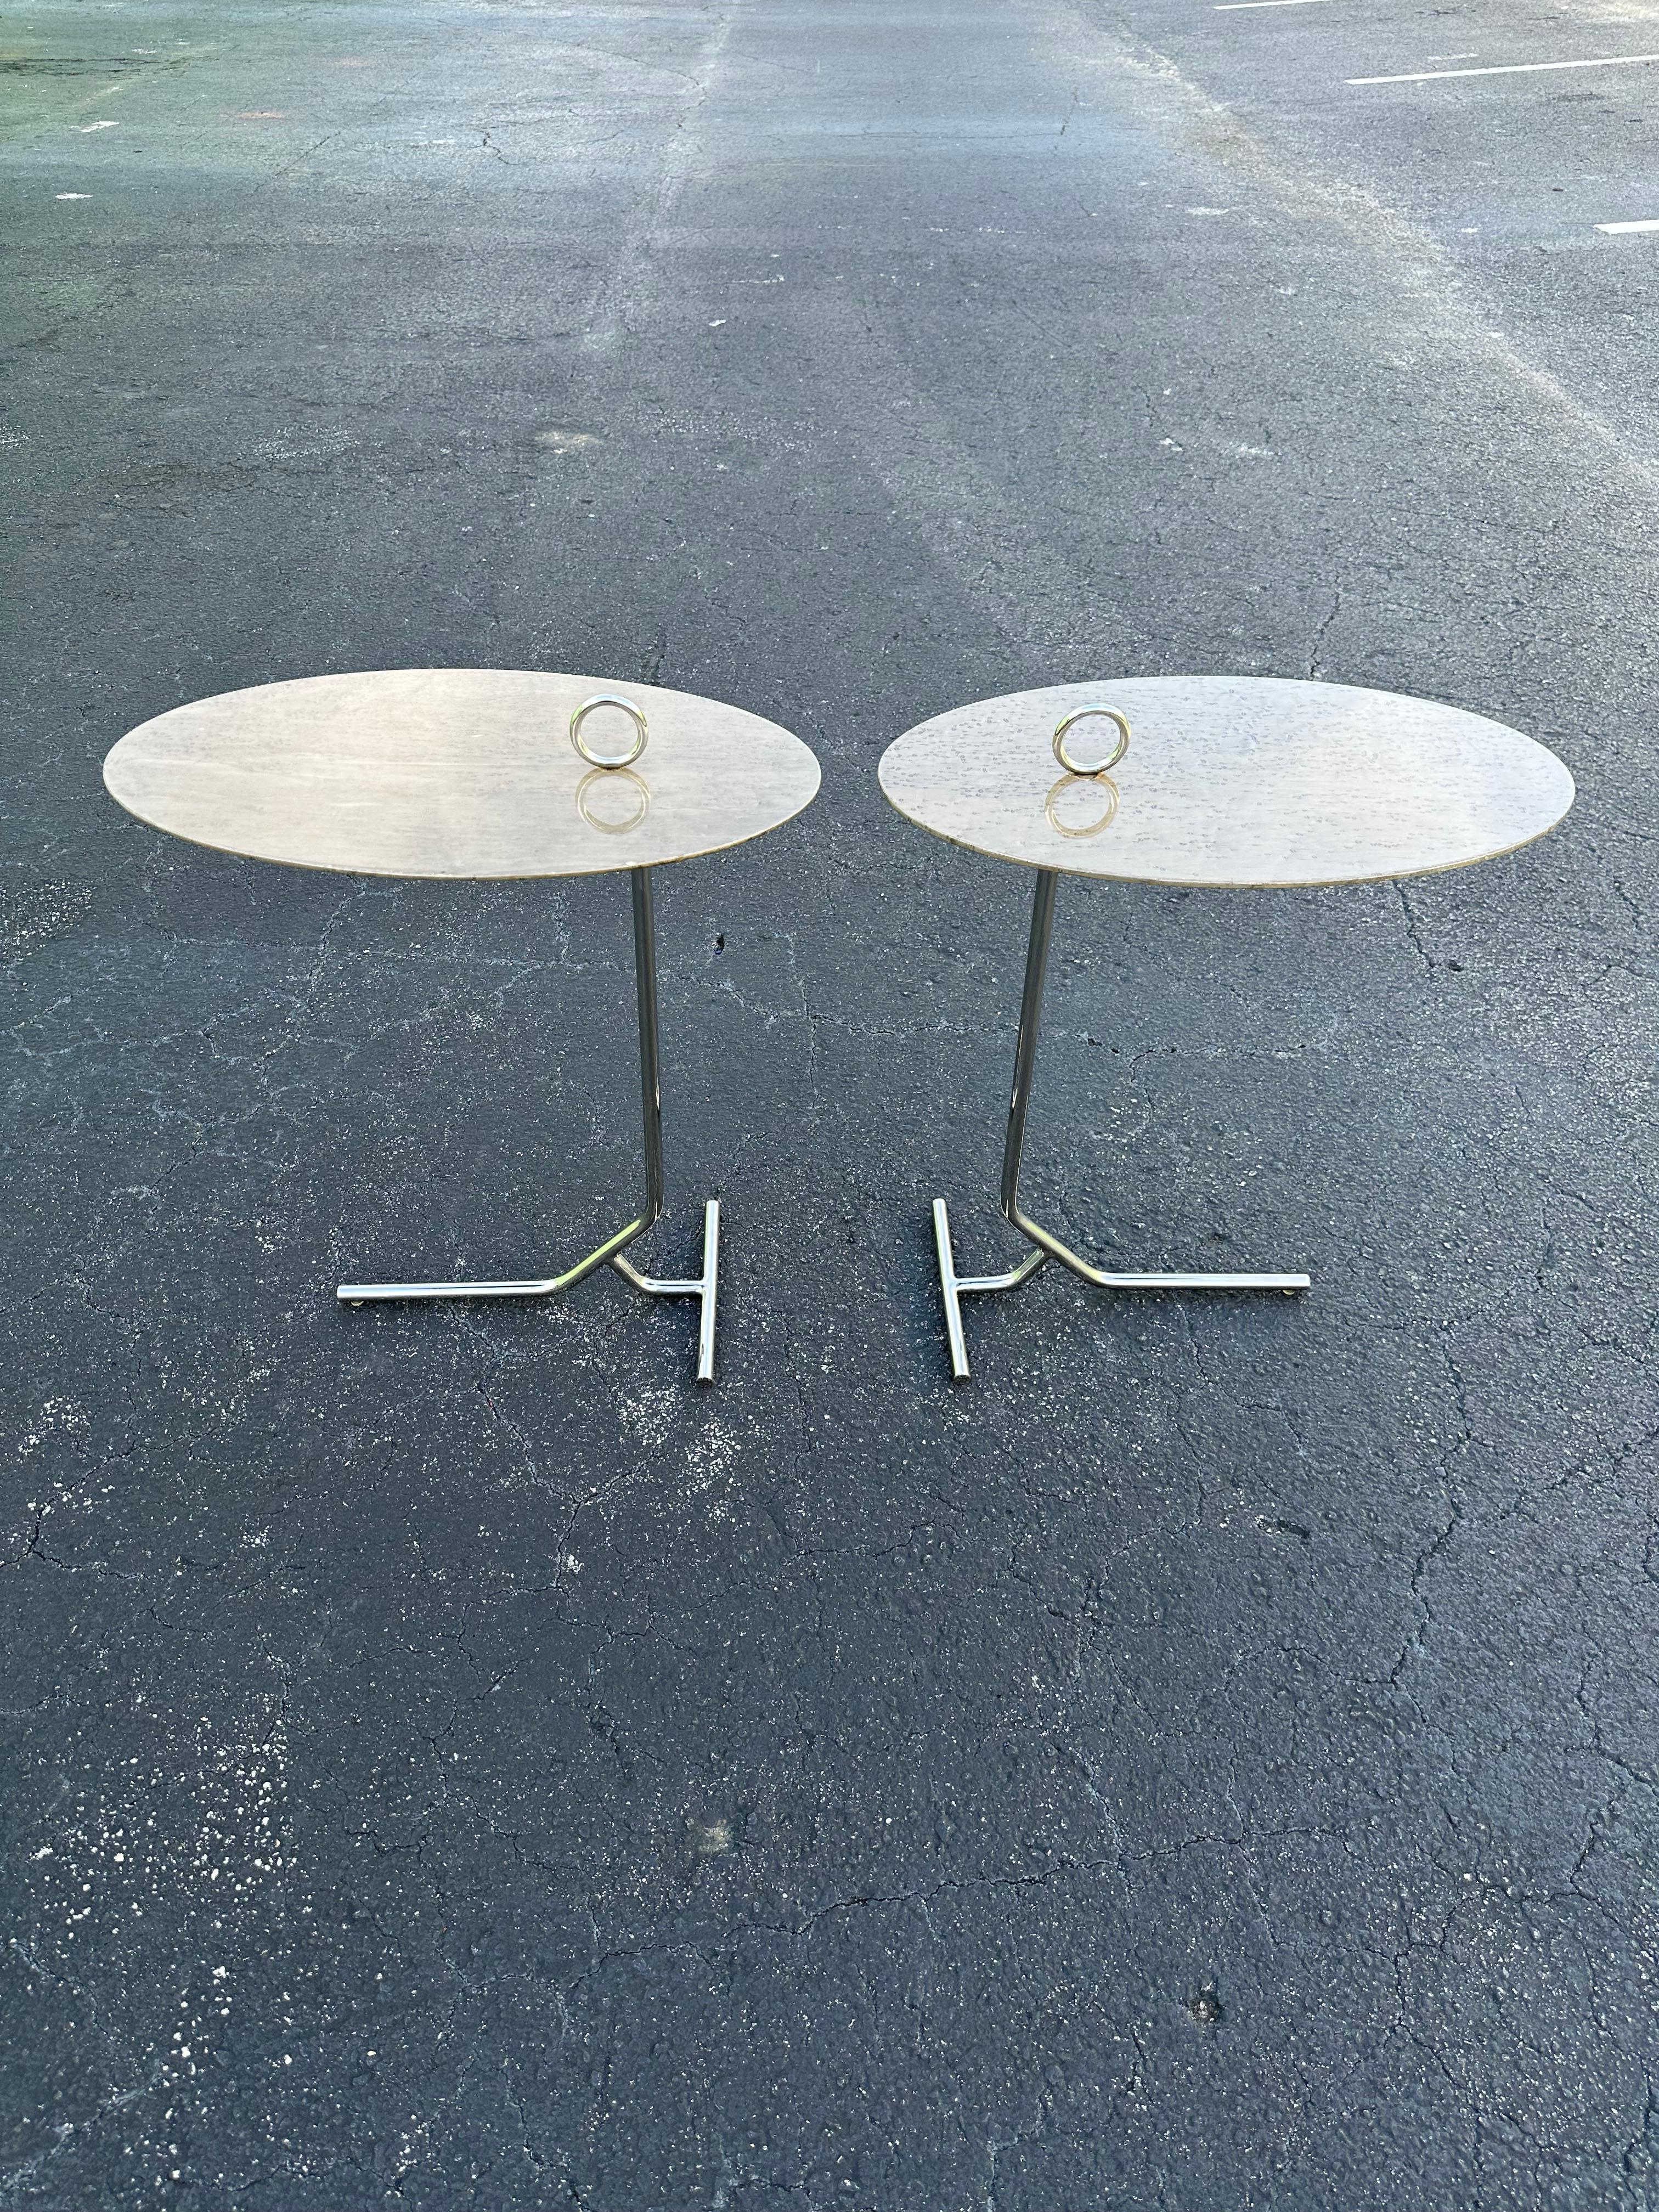 Pair of gray tone birdseye maple top, chrome base cantilever side tables. These tables are great for multiple seating styles and can be very convenient for long sofas or benches. Good used condition with some wear and age to the clear coat finish on